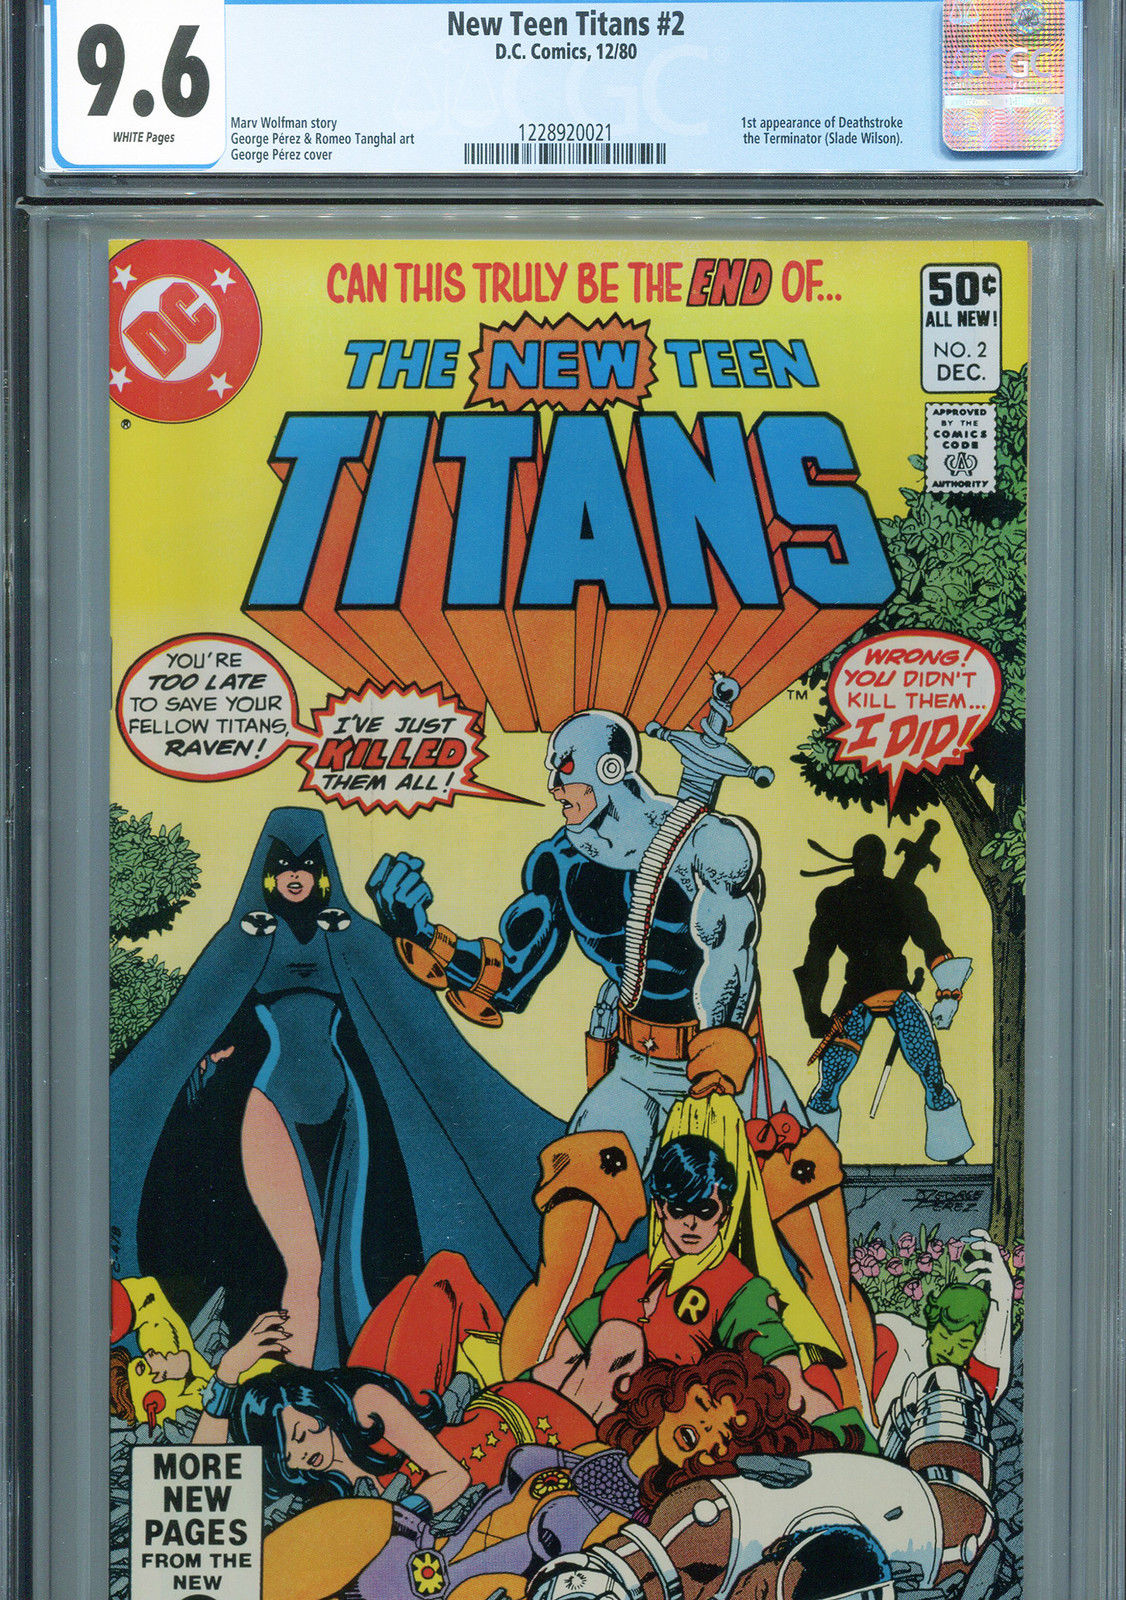 New Teen Titans #2 (DC Comics 1980) CGC Certified 9.6 White Pages